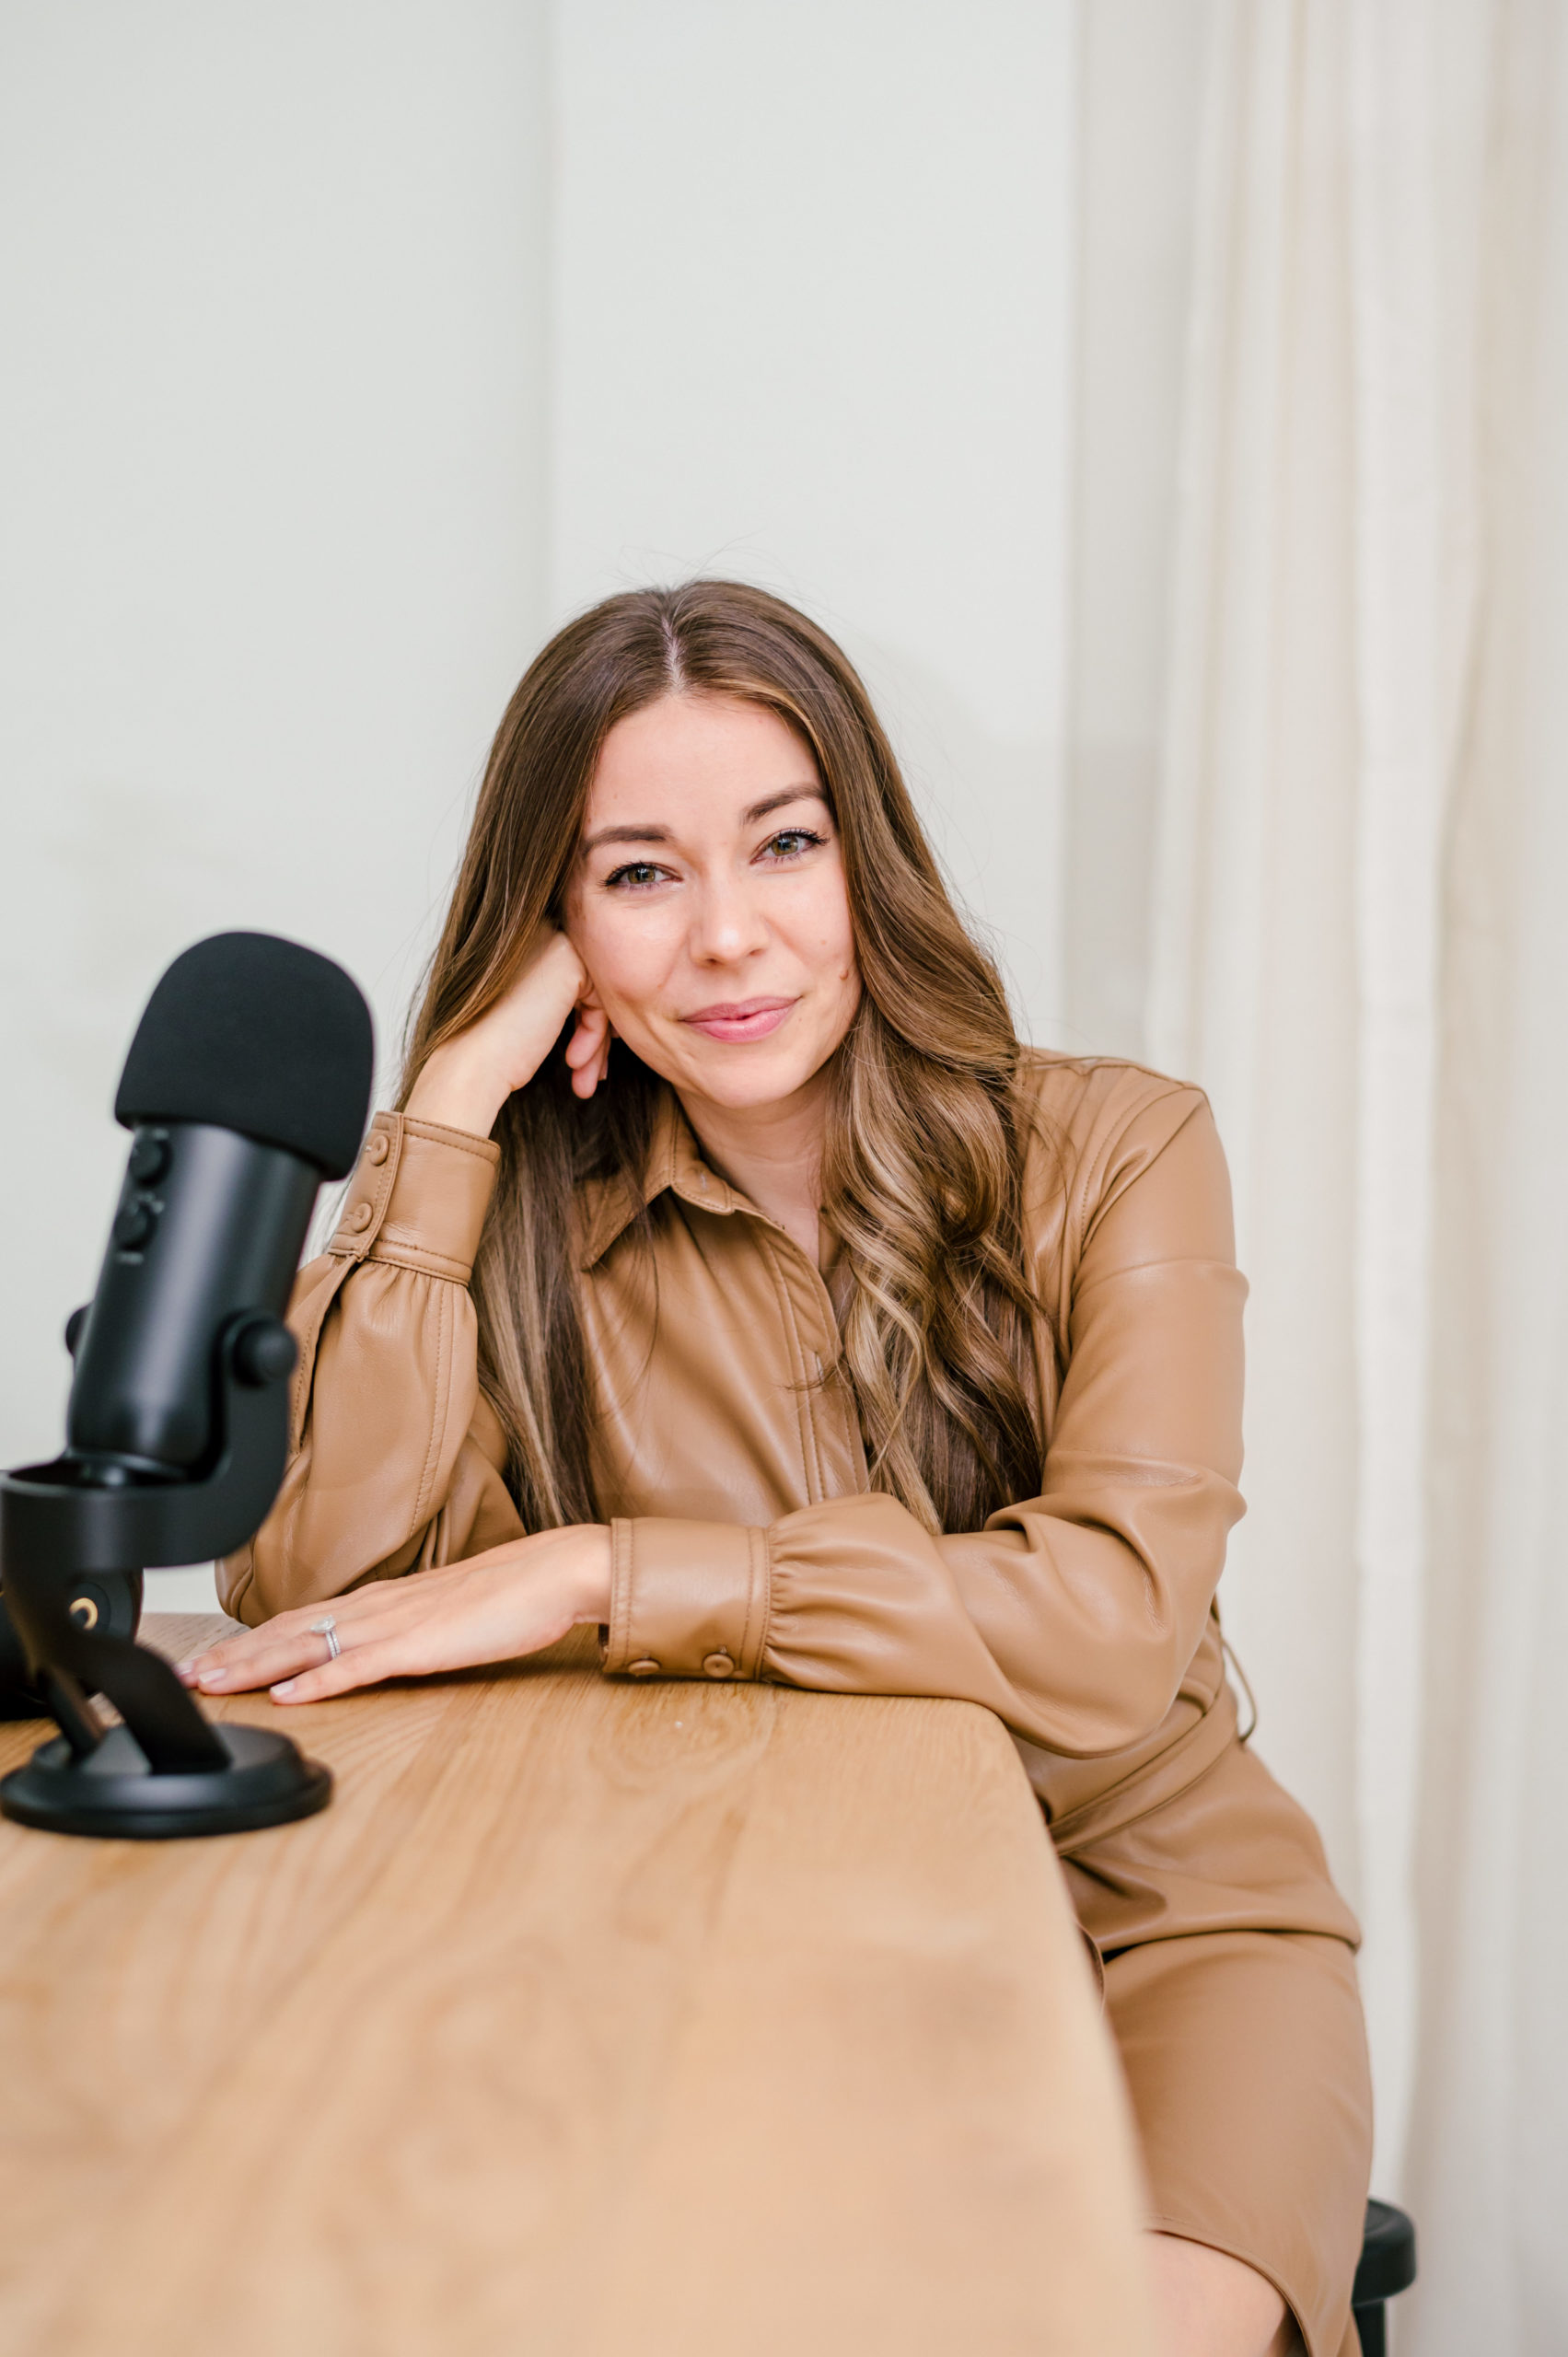 Woman in a leather dress leaning on wooden table next to a podcast mic